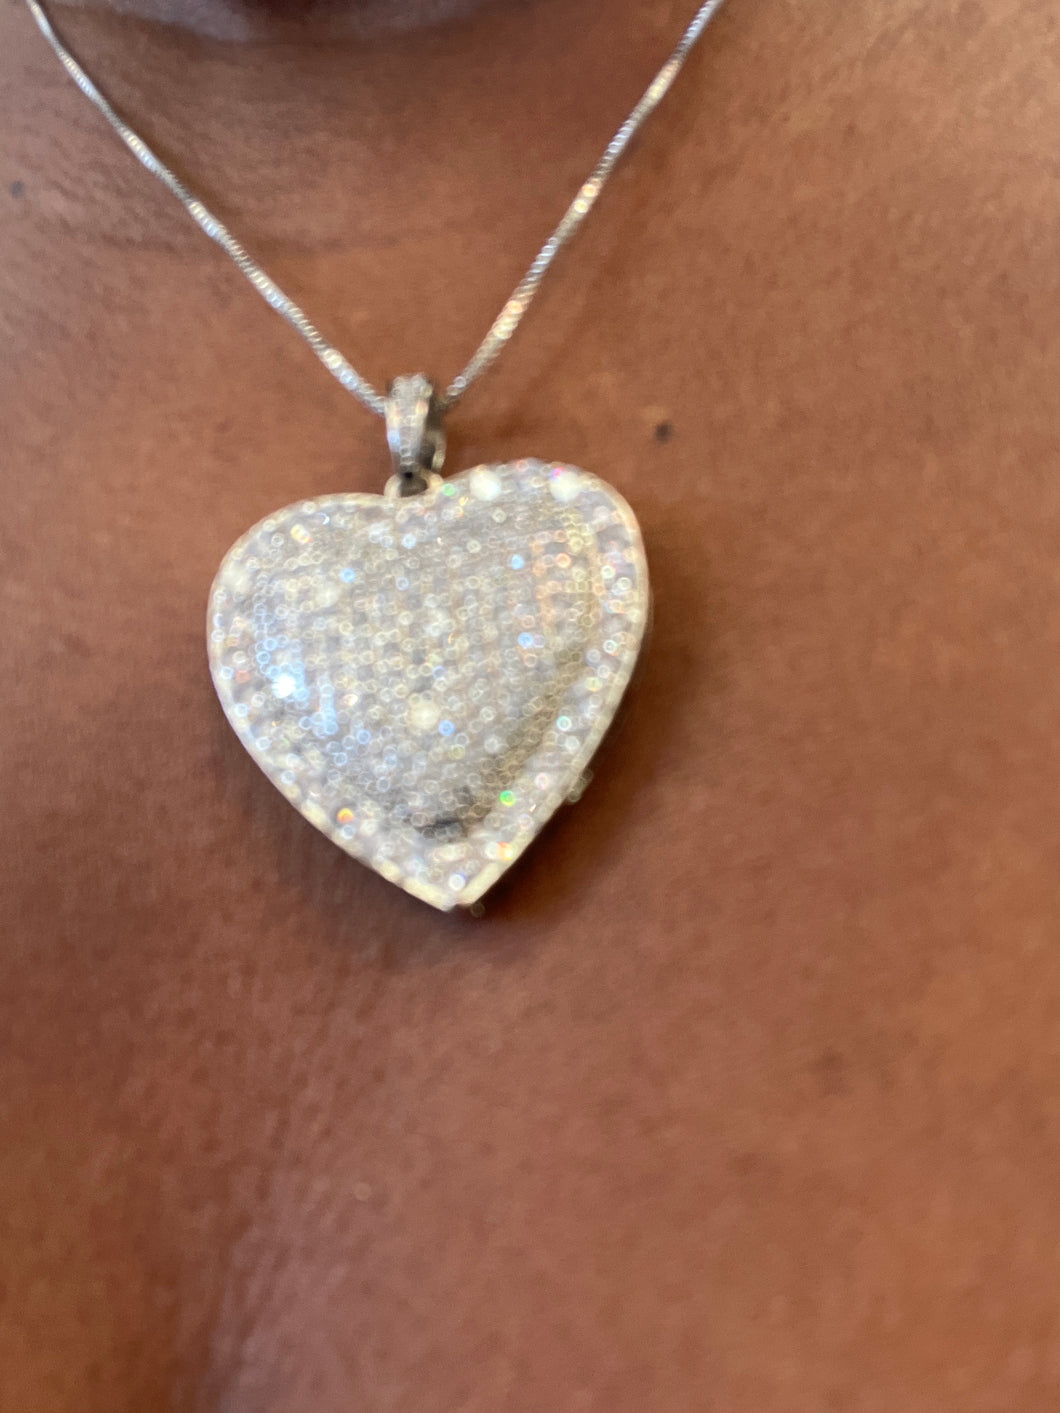 My heart necklace